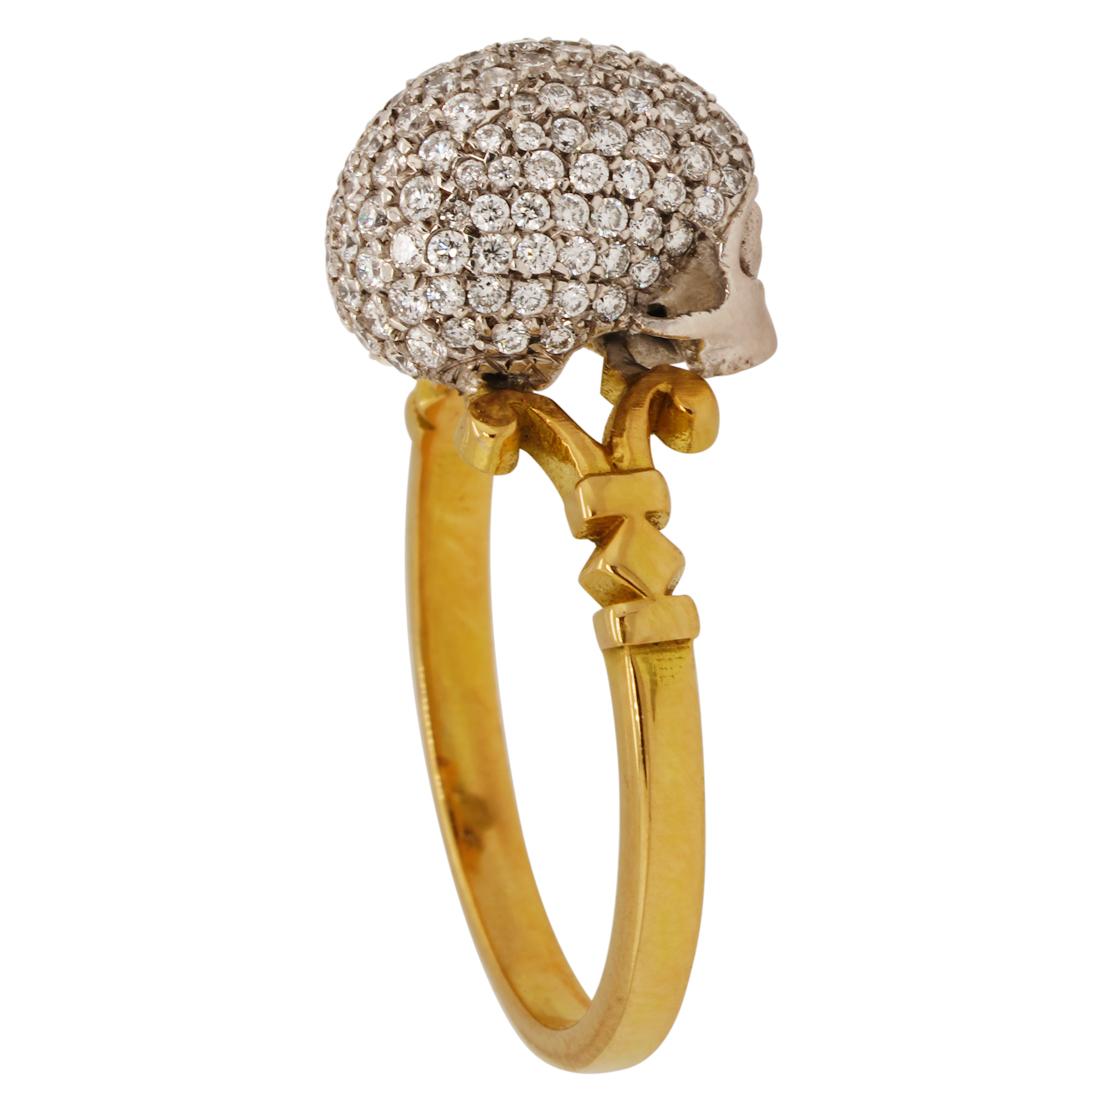 Catacomb Saint Diamond Encrusted Skull Ring in 18kt Gold with Diamonds & Rubies For Sale 4